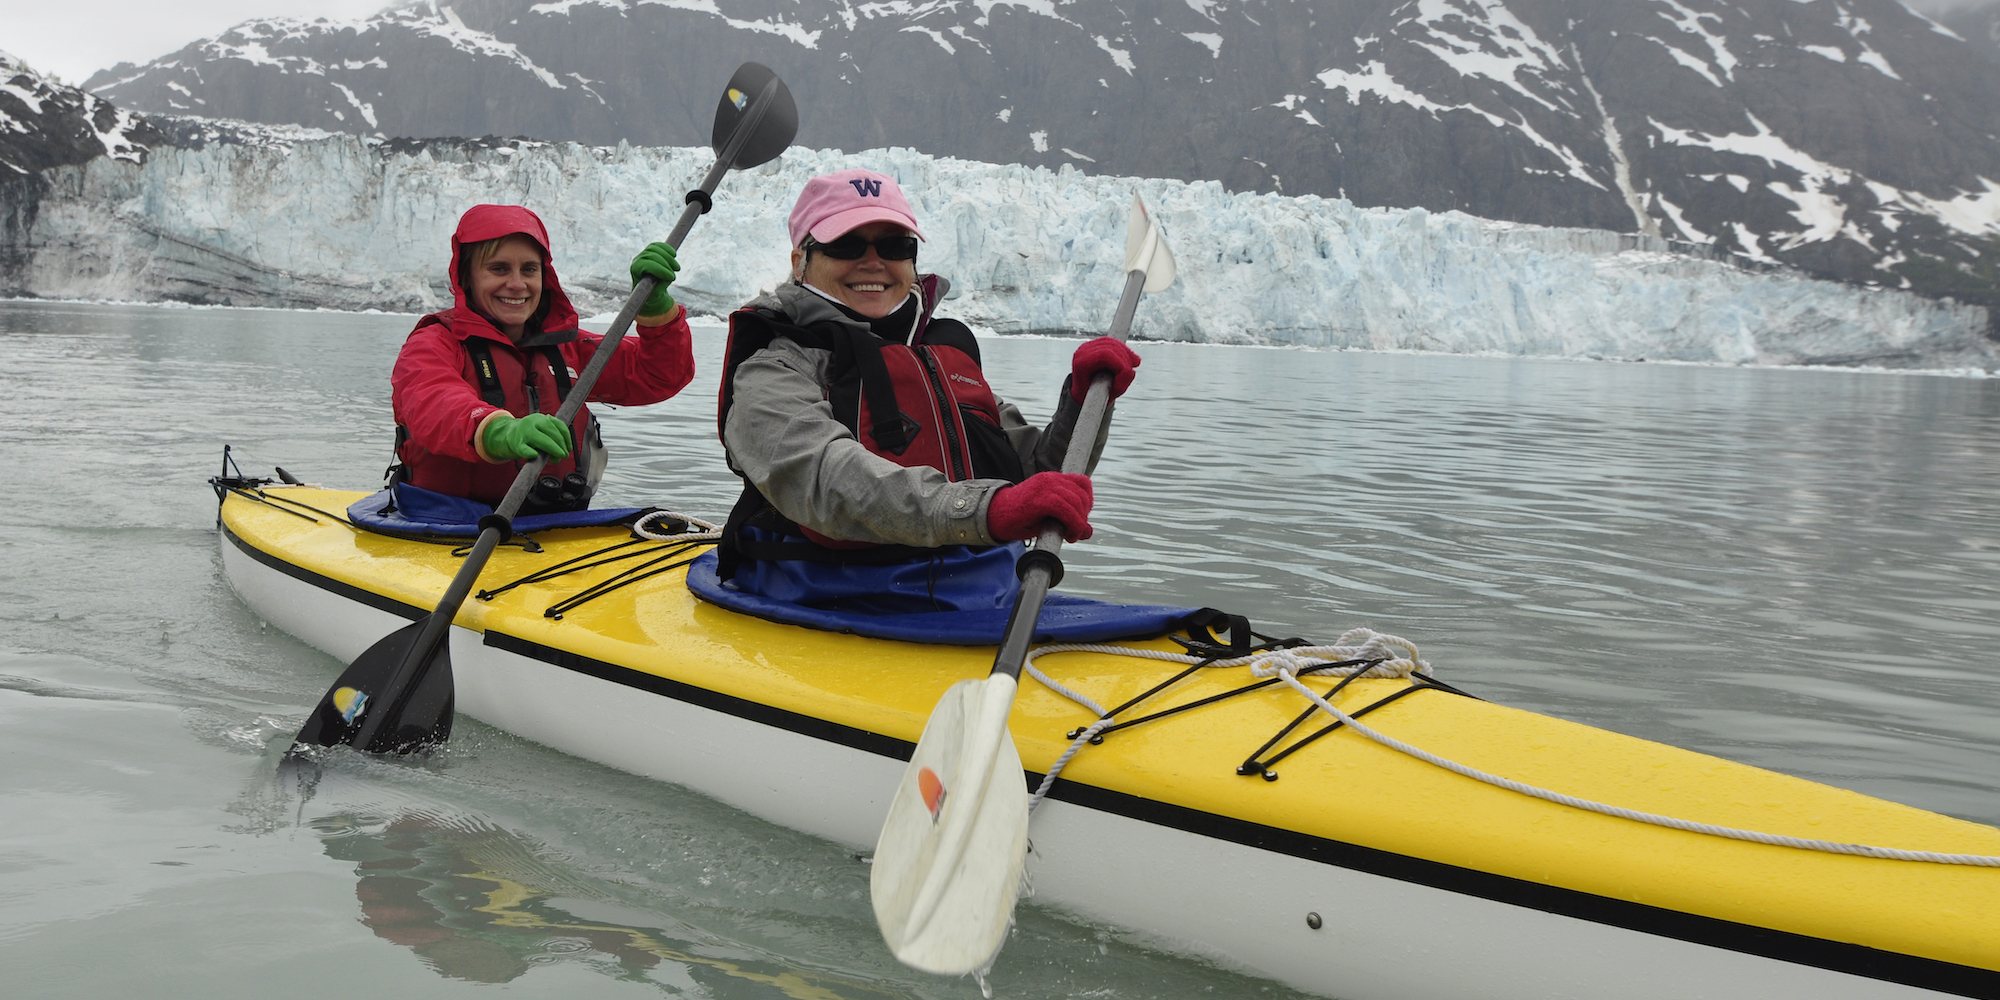 Two women paddling a yellow tandem kayak both wearing colorful gloves in Alaska in front of glaciers